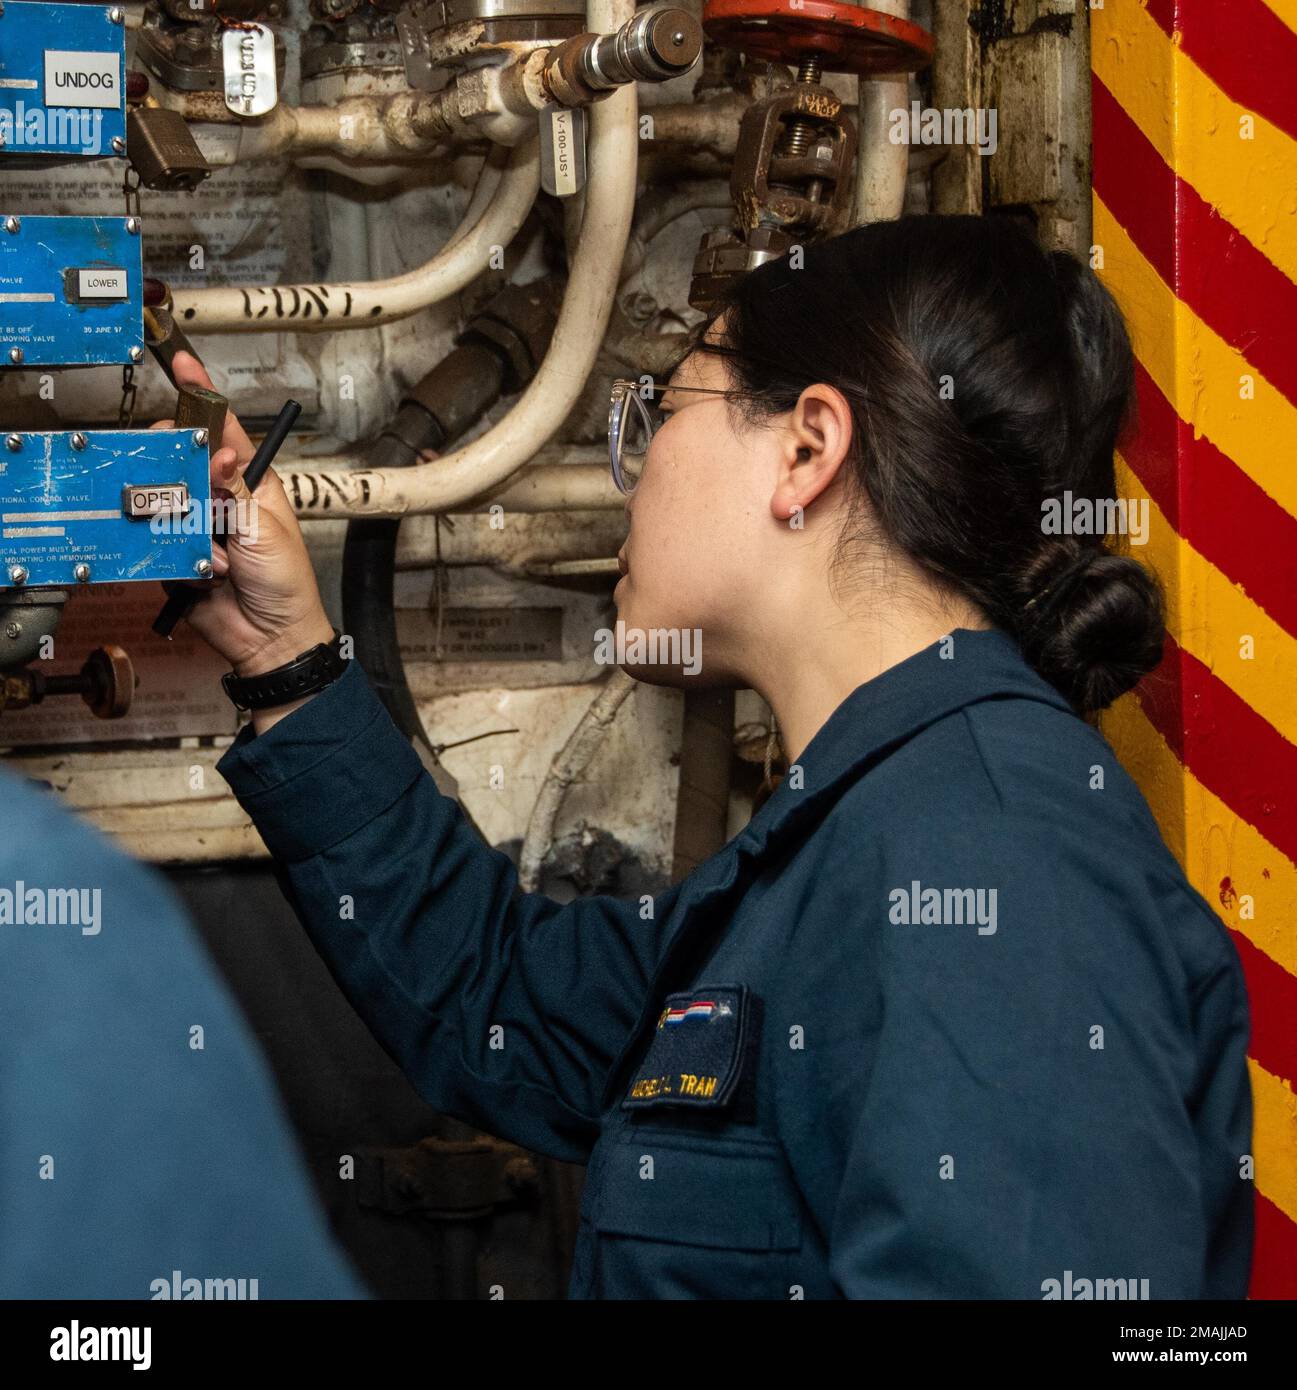 220528-N-GN523-1171 PHILIPPINE SEA (May 28, 2022) Lt. j.g. Michelle Tran, from Centreville, Virginia verifies maintenance performance in the hangar bay of the U.S. Navy’s only forward-deployed aircraft carrier USS Ronald Reagan (CVN 76). Ronald Reagan Sailors conduct routine maintenance at sea to sustain mission readiness. Ronald Reagan, the flagship of Carrier Strike Group 5, provides a combat-ready force that protects and defends the United States, and supports alliances, partnerships and collective maritime interests in the Indo-Pacific region. Stock Photo